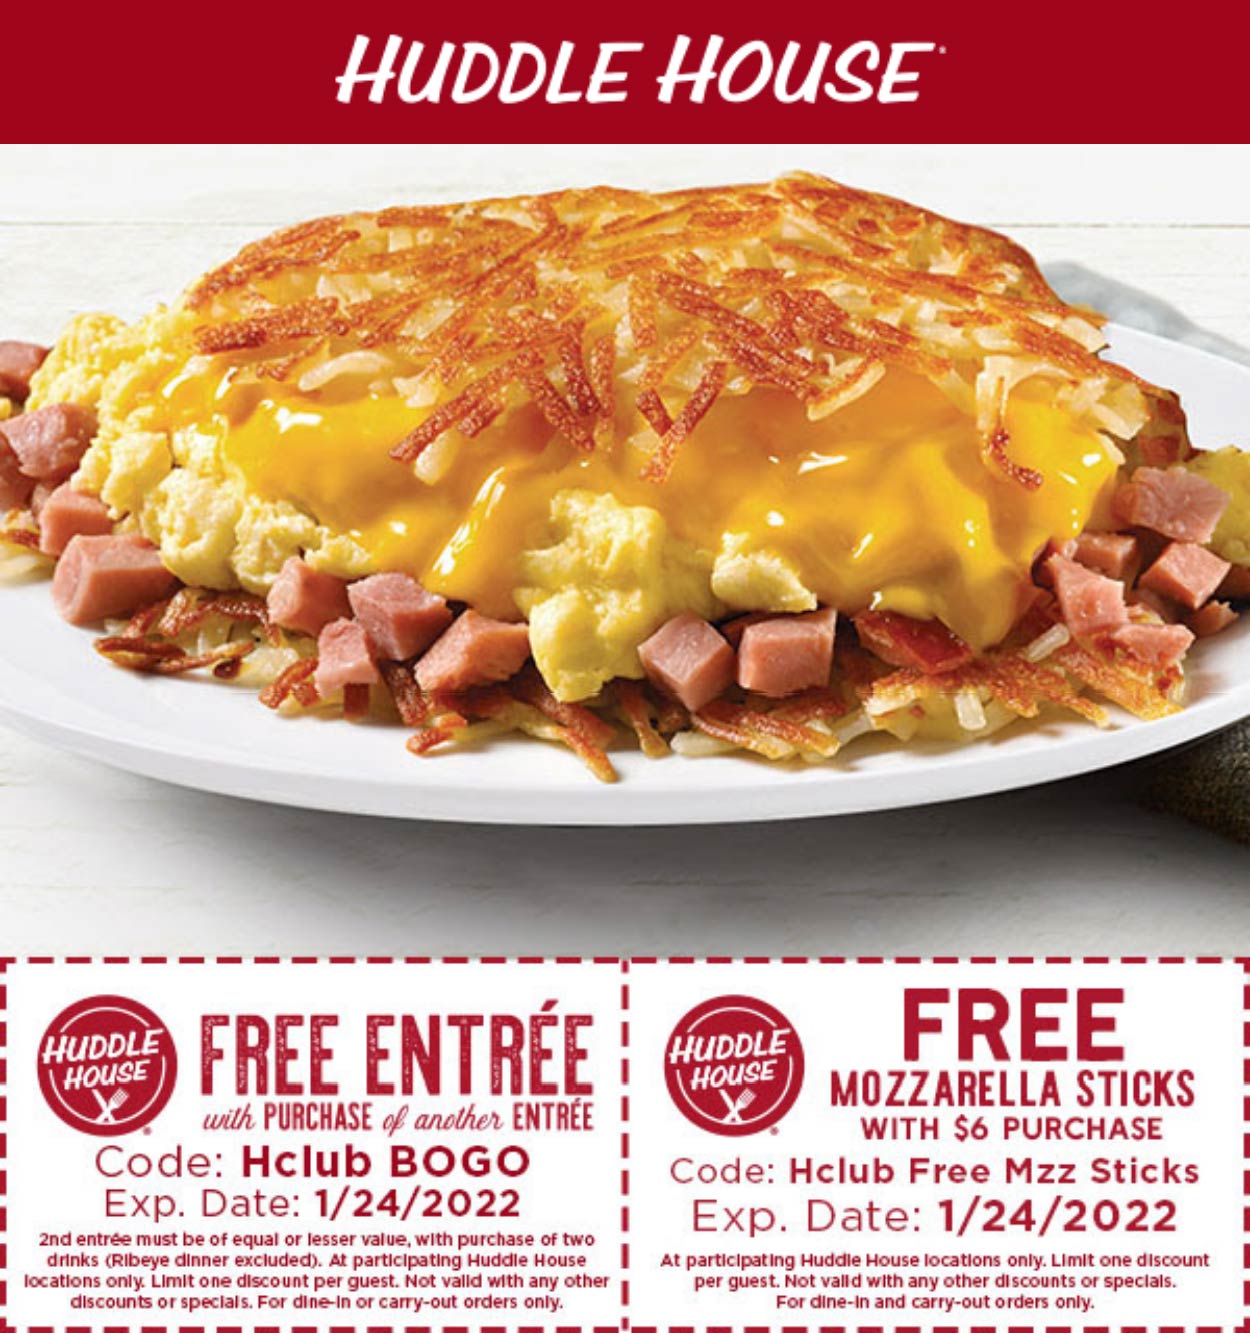 Huddle House restaurants Coupon  Second entree free & more at Huddle House #huddlehouse 